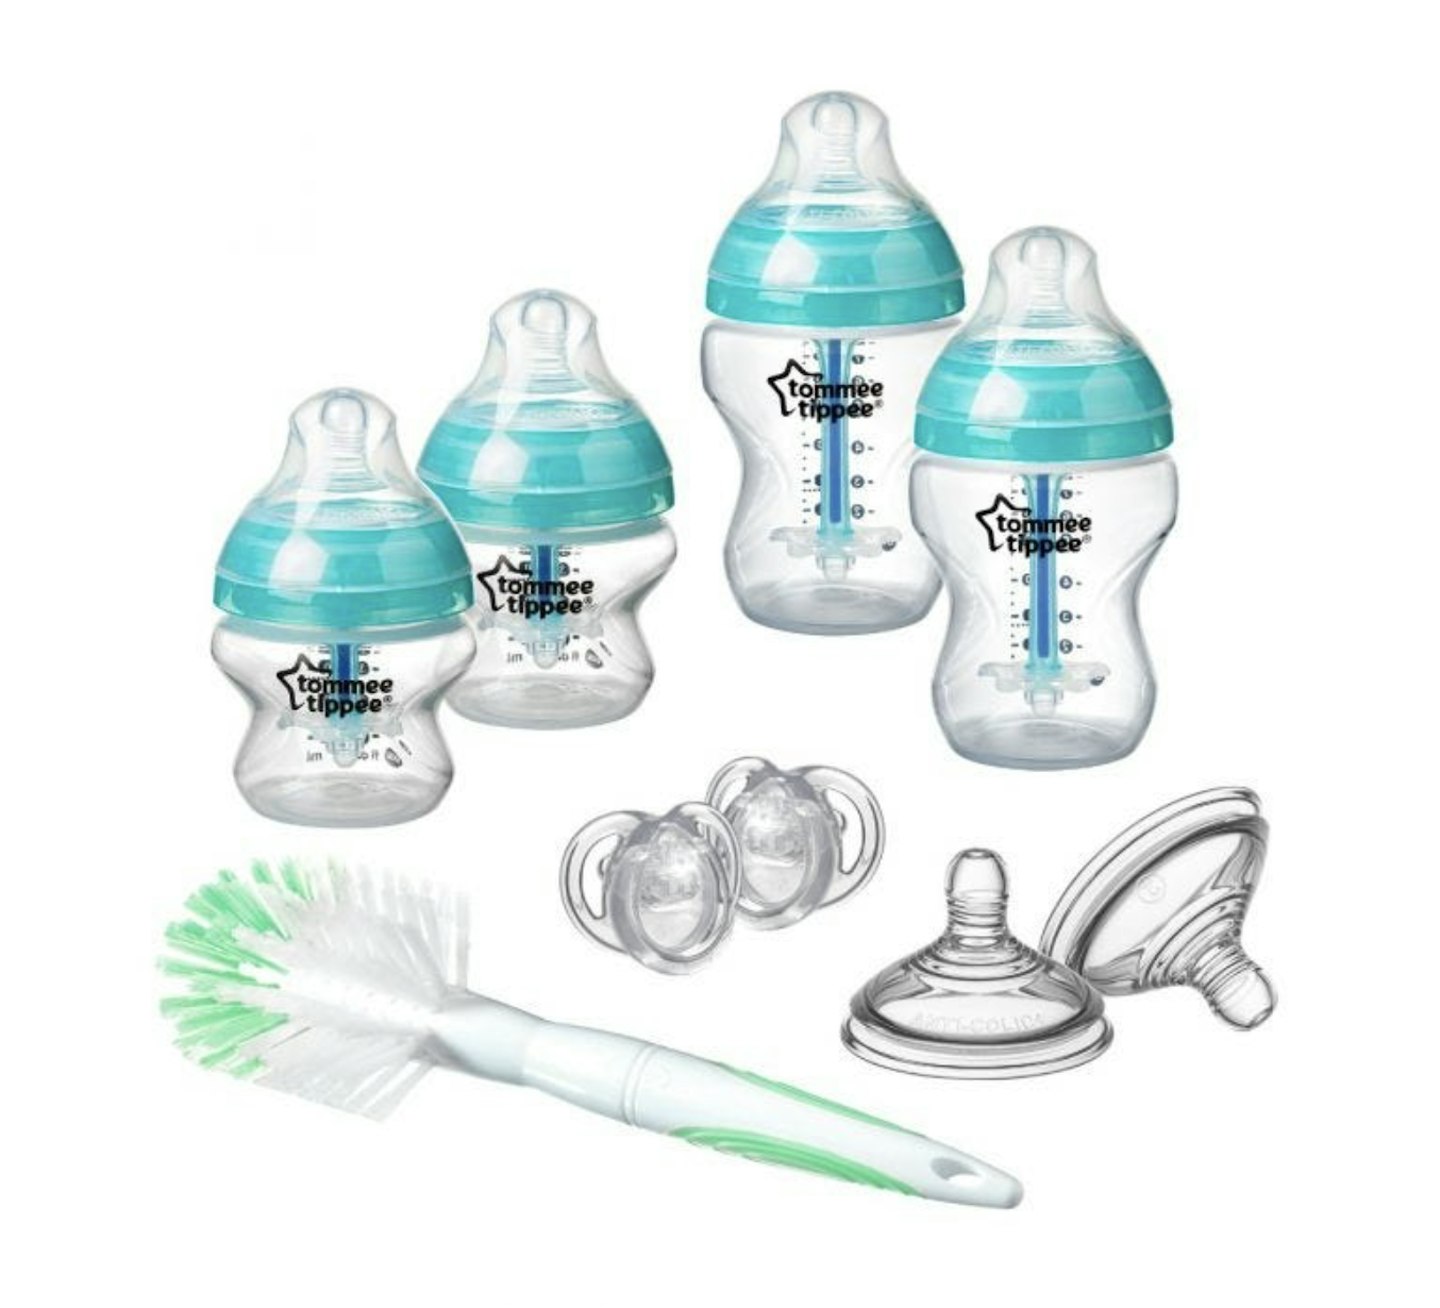 The Tommee Tippee Advanced Anti-Colic starter set